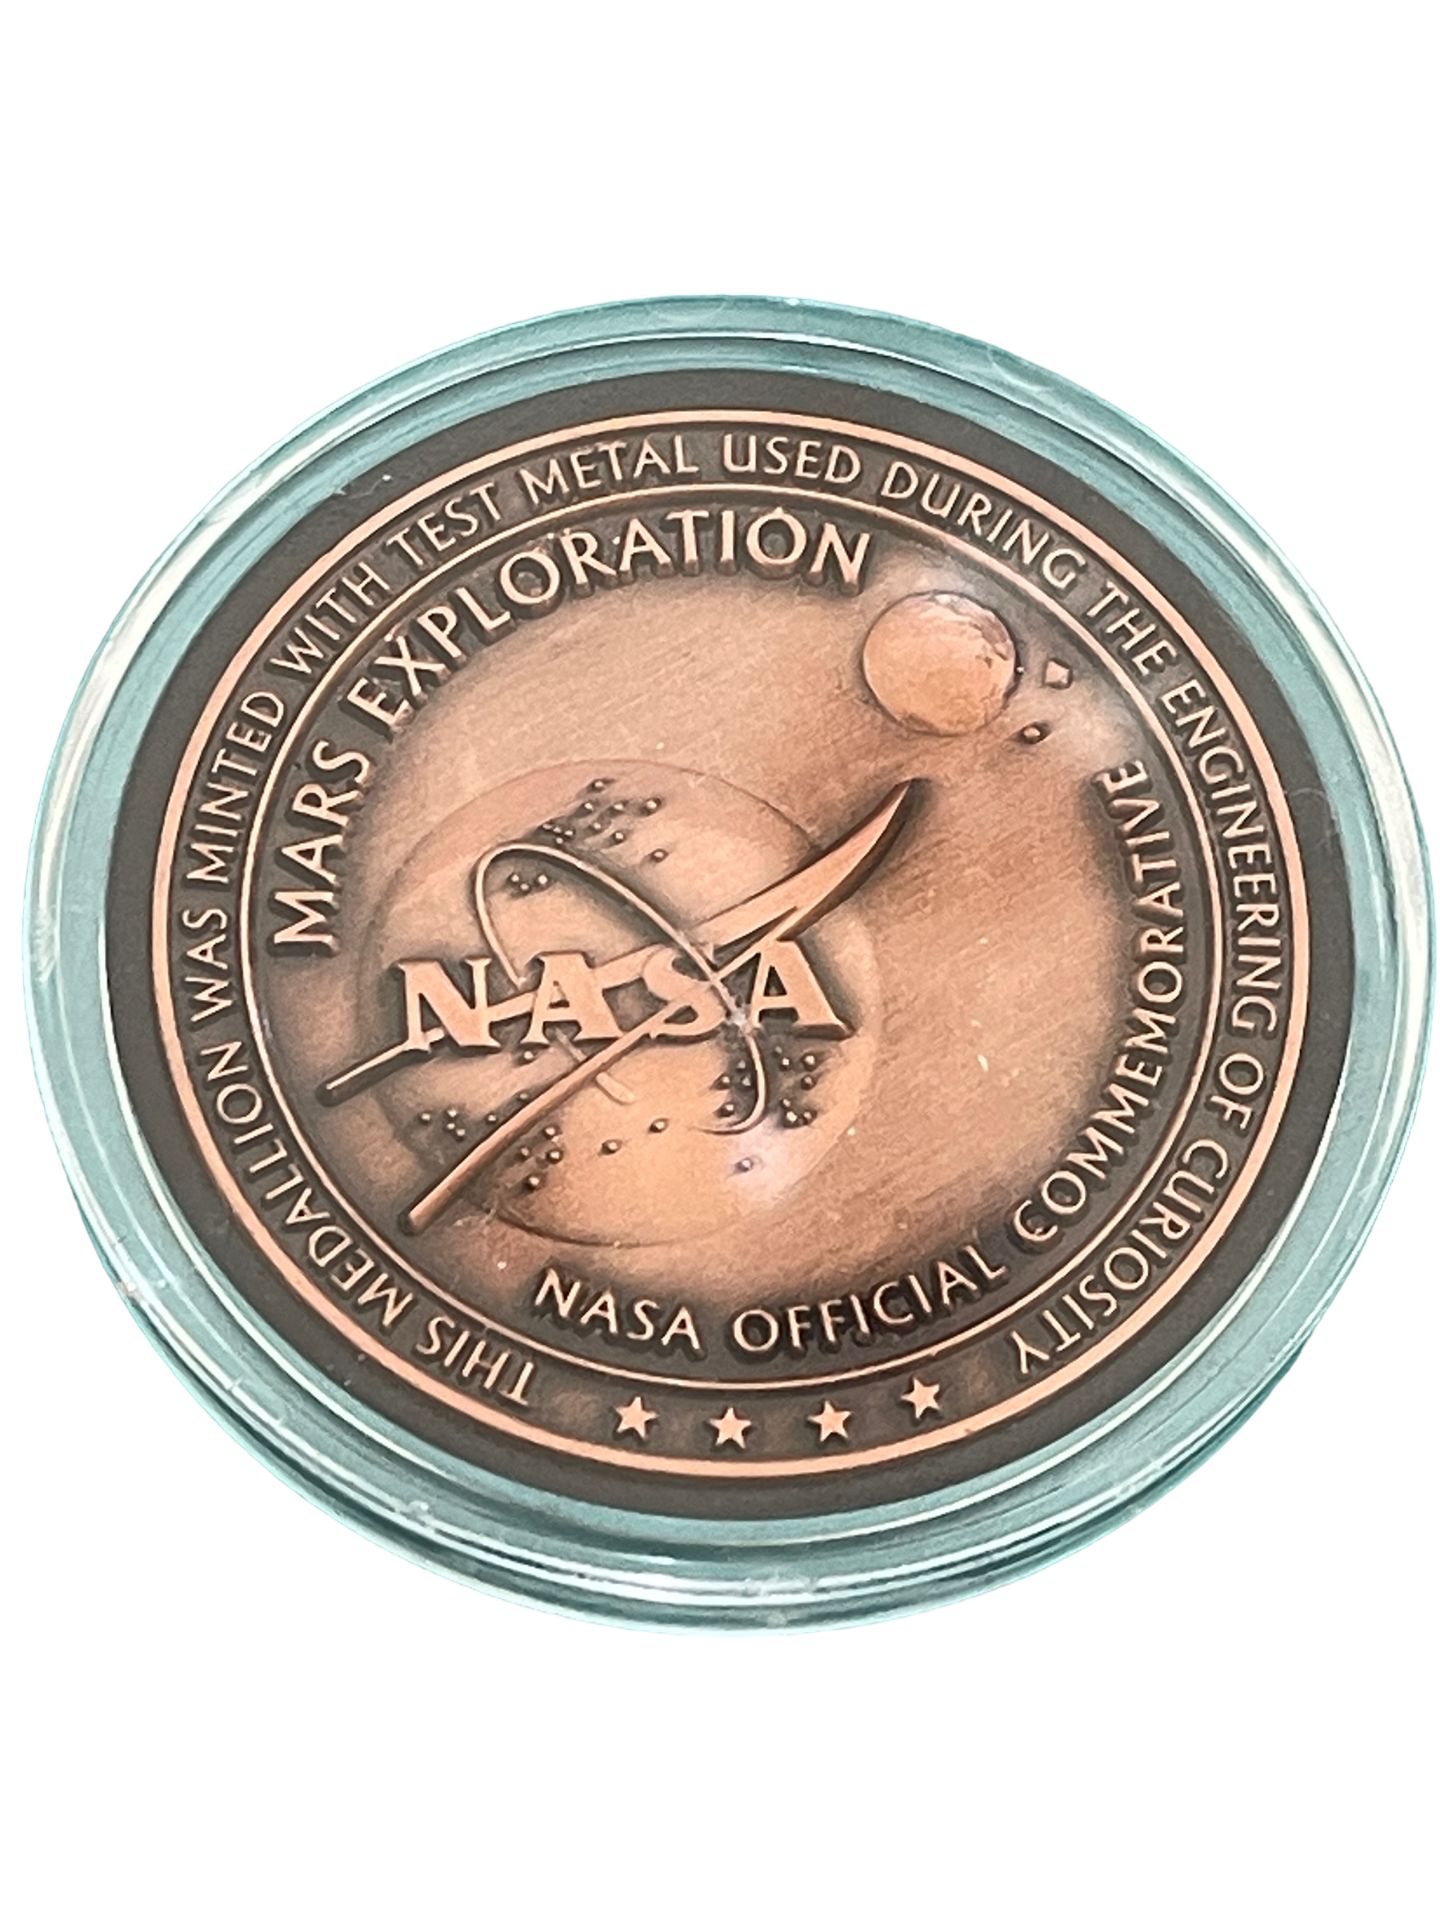 Nasa Applo 11 medallion, limited edition, contains actual metal from the spacecraft flown - Image 2 of 2